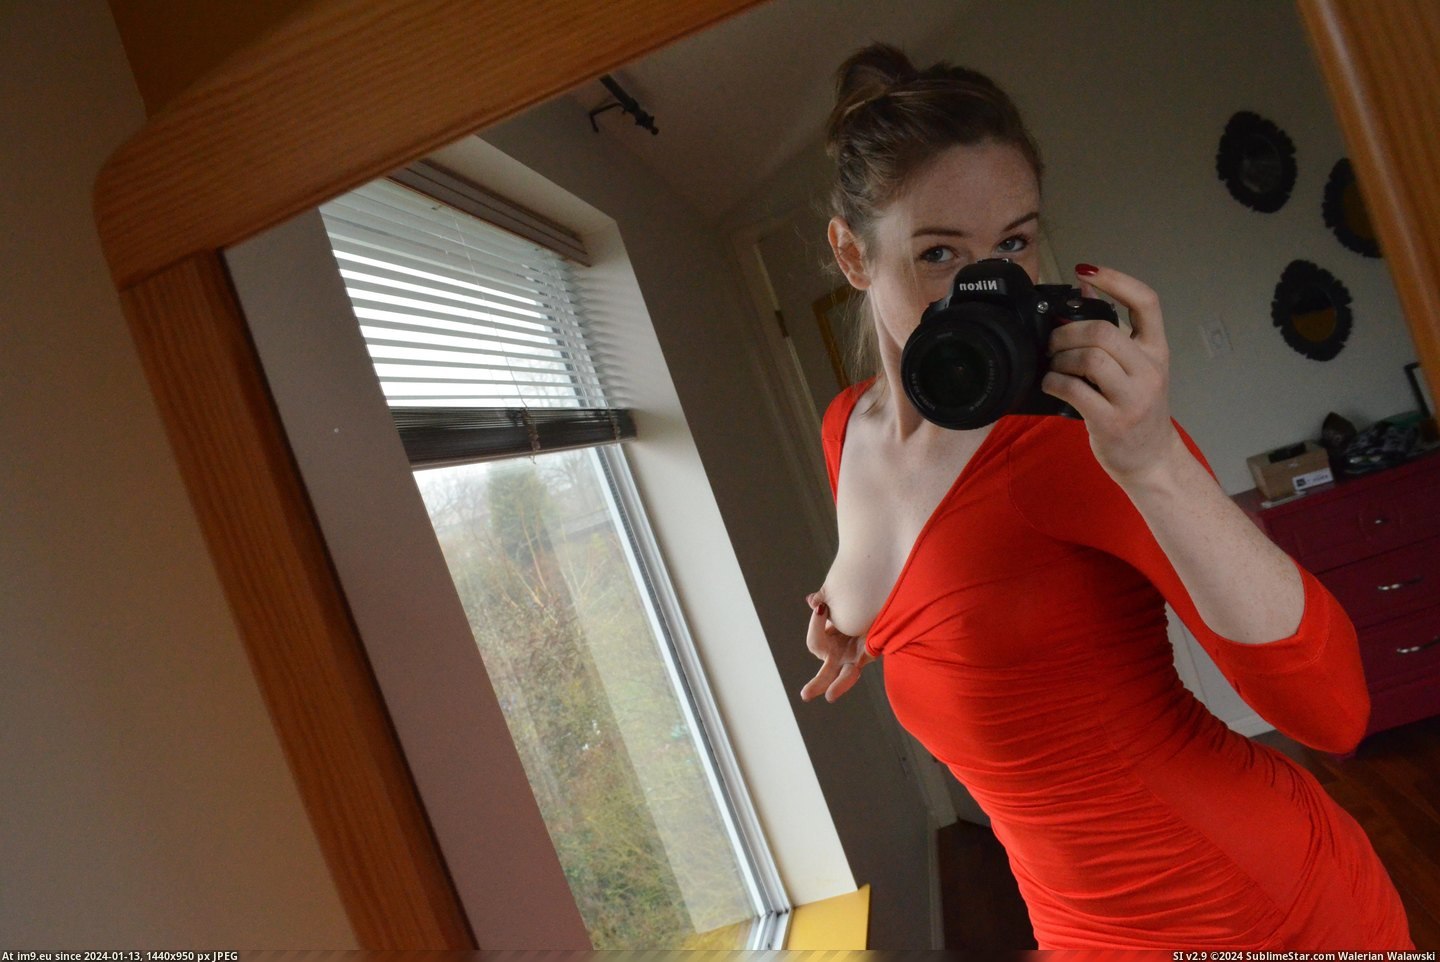 #Tight #Dress #Xmas #Too #Party [Gonewild] Is this dress too tight [f]or an Xmas party? 1 Pic. (Bild von album My r/GONEWILD favs))